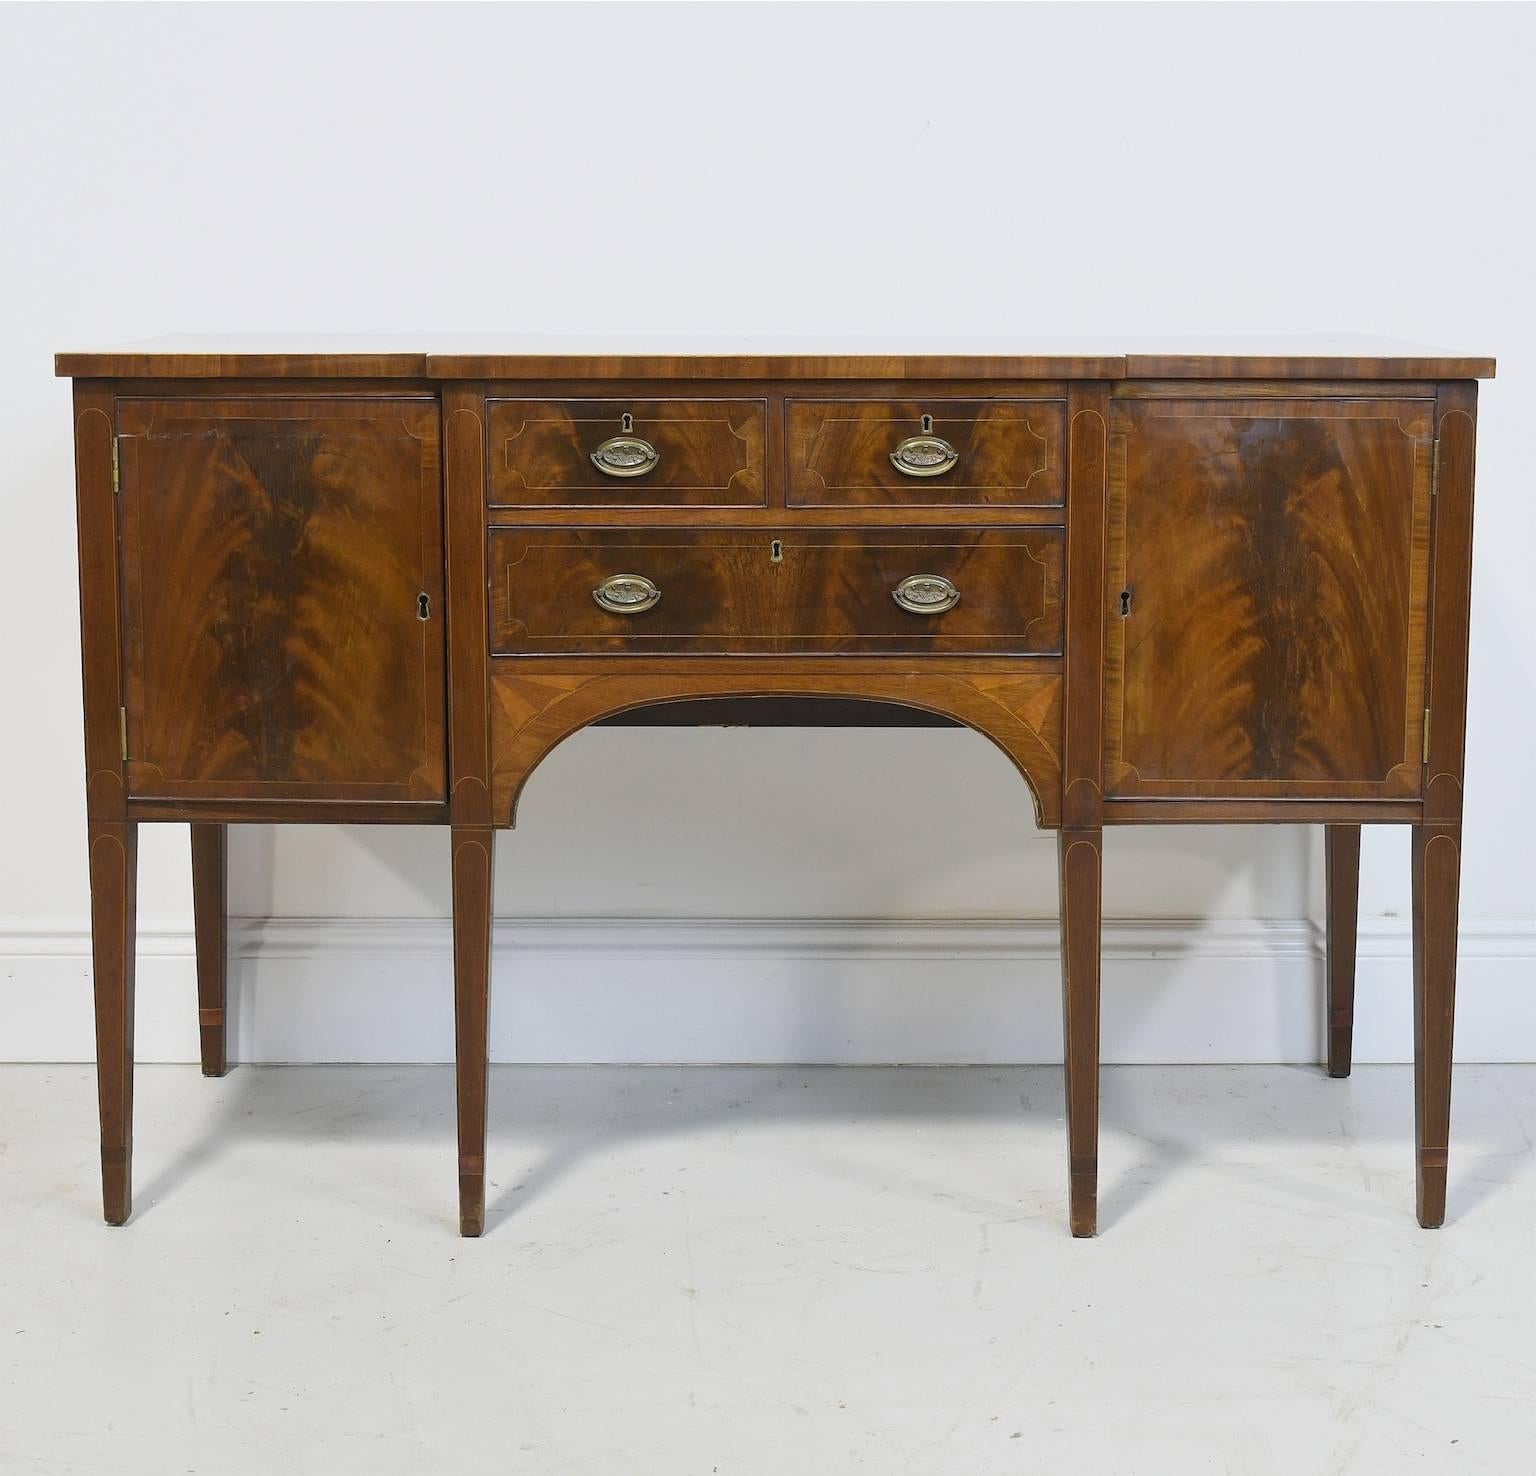 A late 19th century Hepplewhite-style sideboard in mahogany with line inlays on the drawer fronts and on the legs. Doors are edge-banded & have figured mahogany veneers on door panels and drawer fronts. Hardware is original to cabinet. Sideboard was